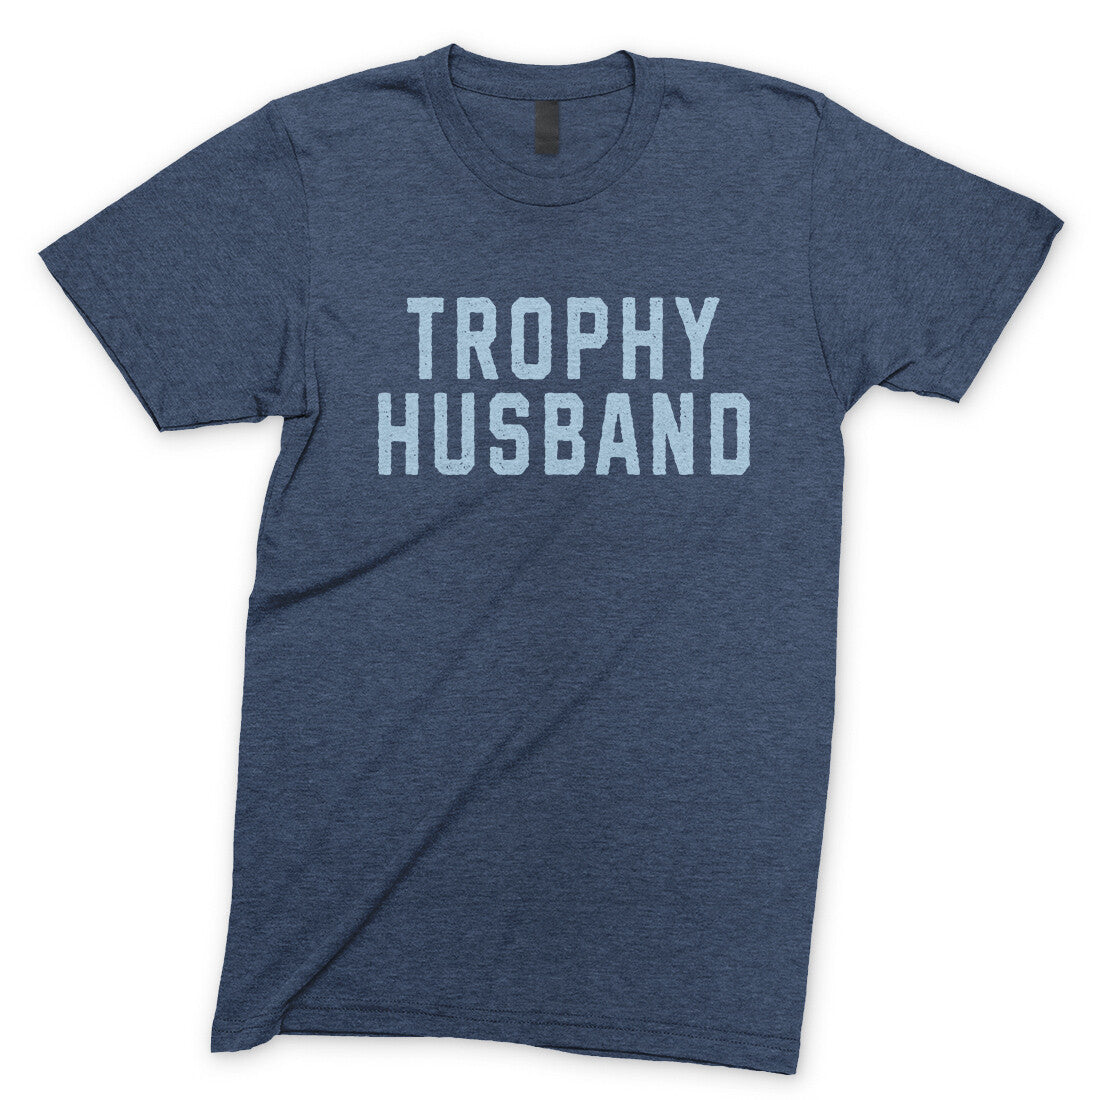 Trophy Husband in Navy Heather Color